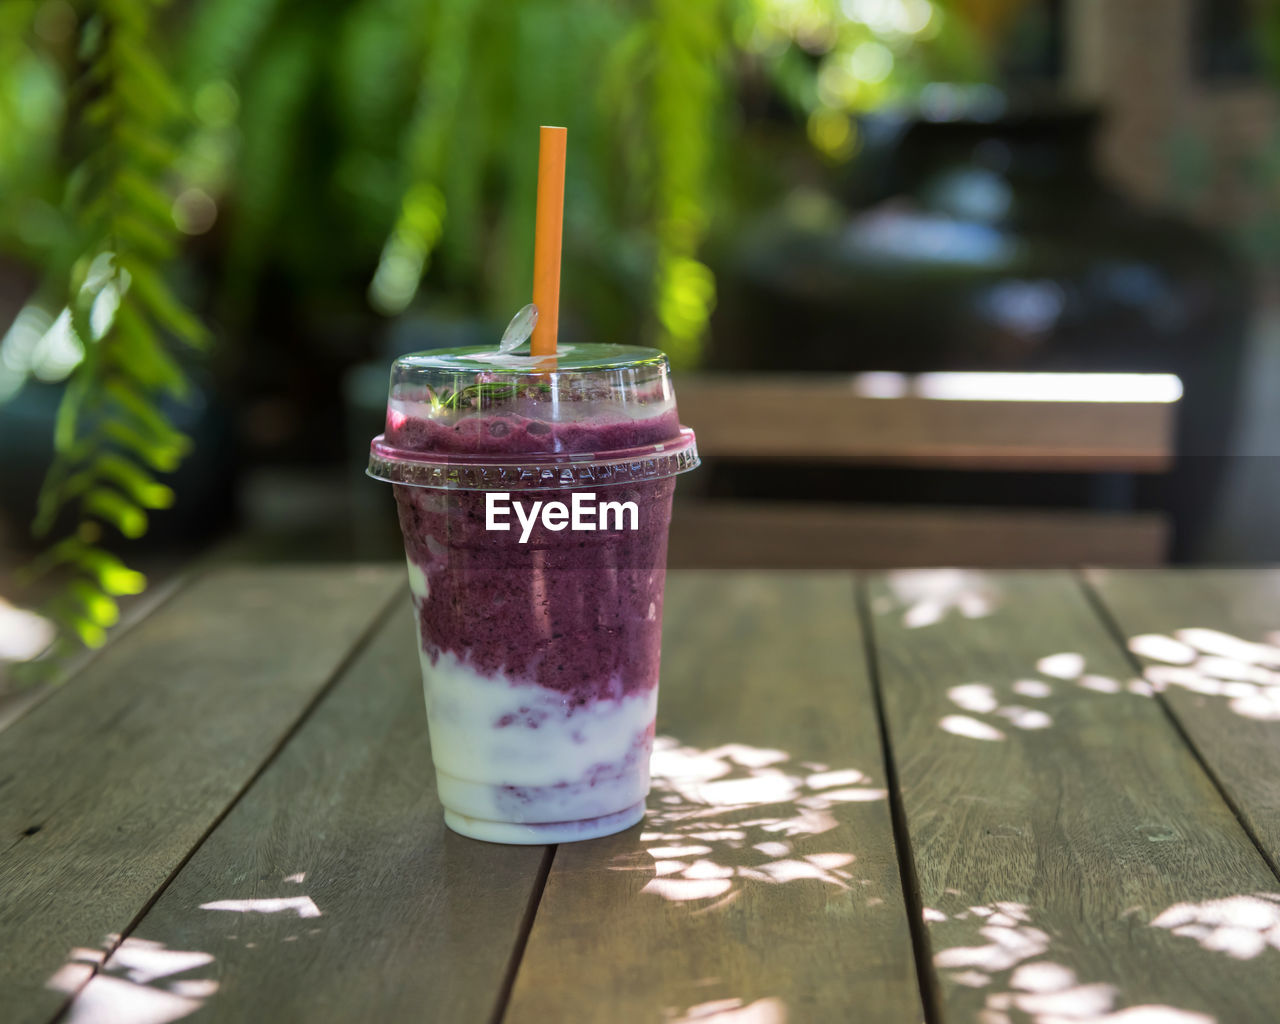 Blueberry yogurt smooties on wooden table of coffee shop garden cafe with blur foliage light